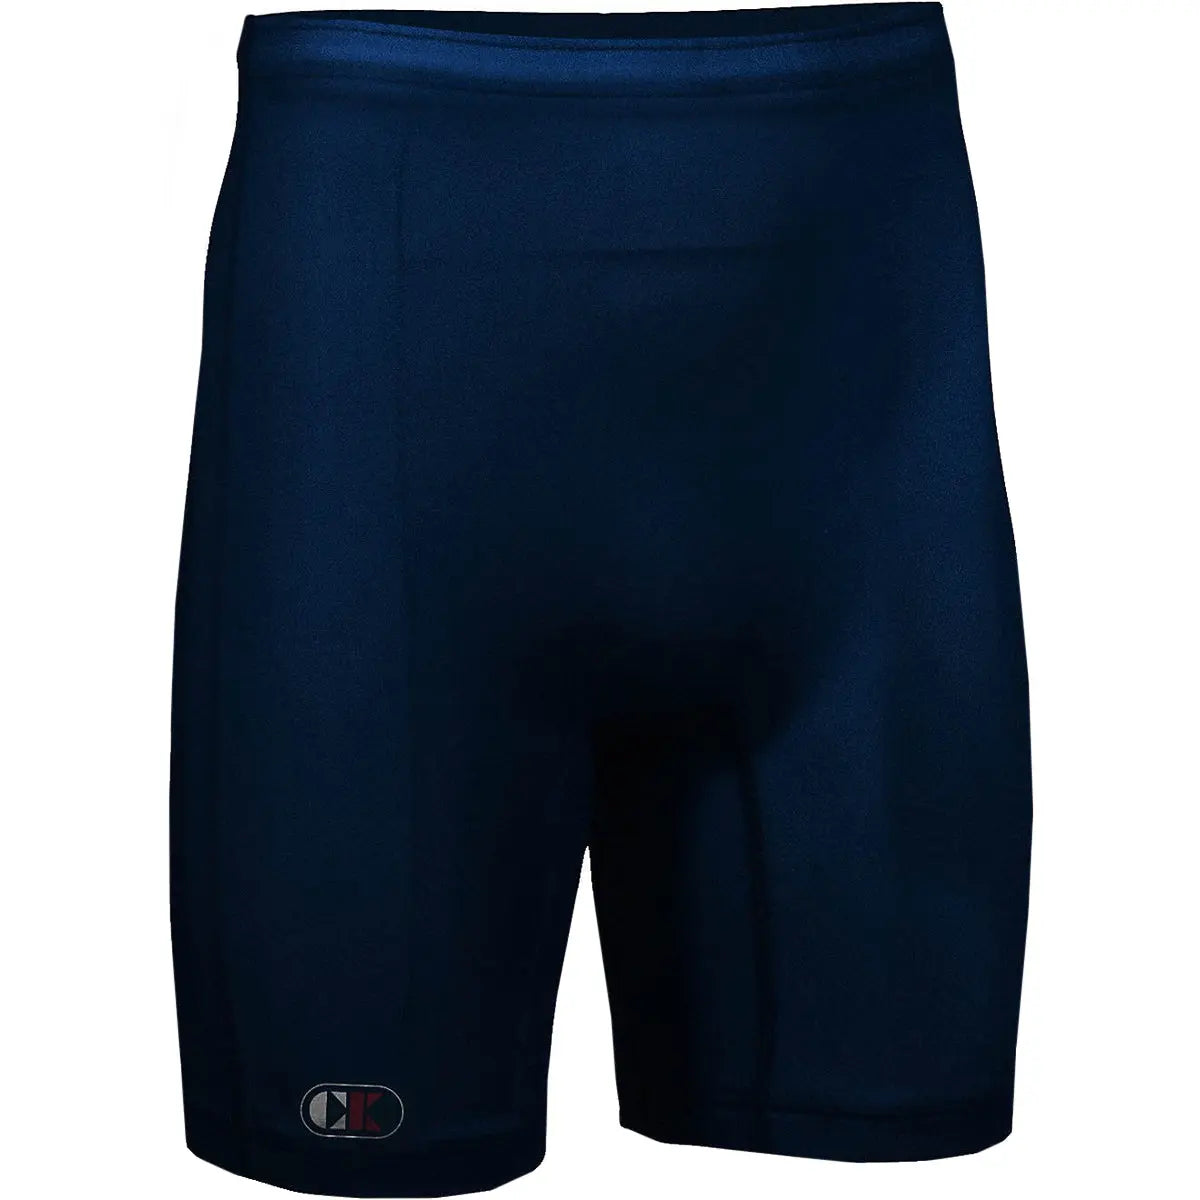 Cliff Keen Compression Gear Workout Shorts - Navy Cliff Keen